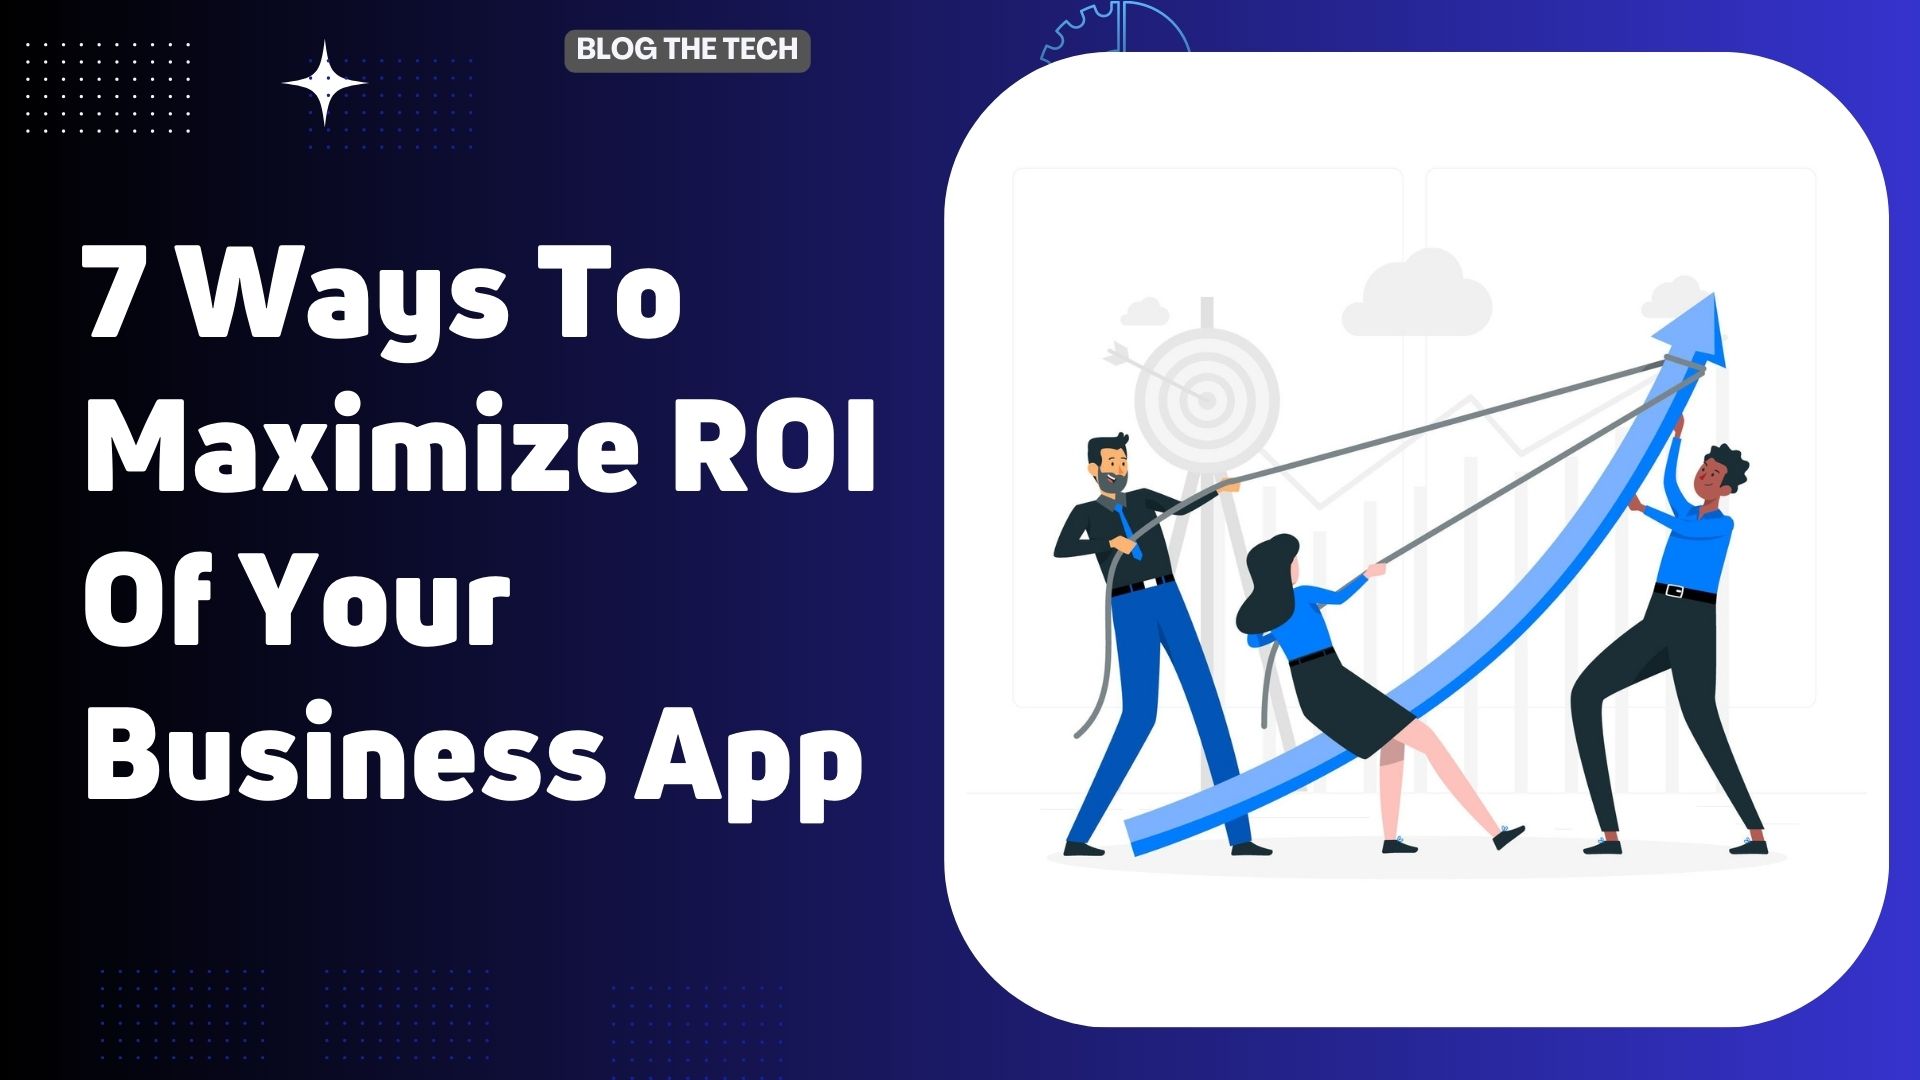 7 Ways To Maximize ROI Of Your Business App